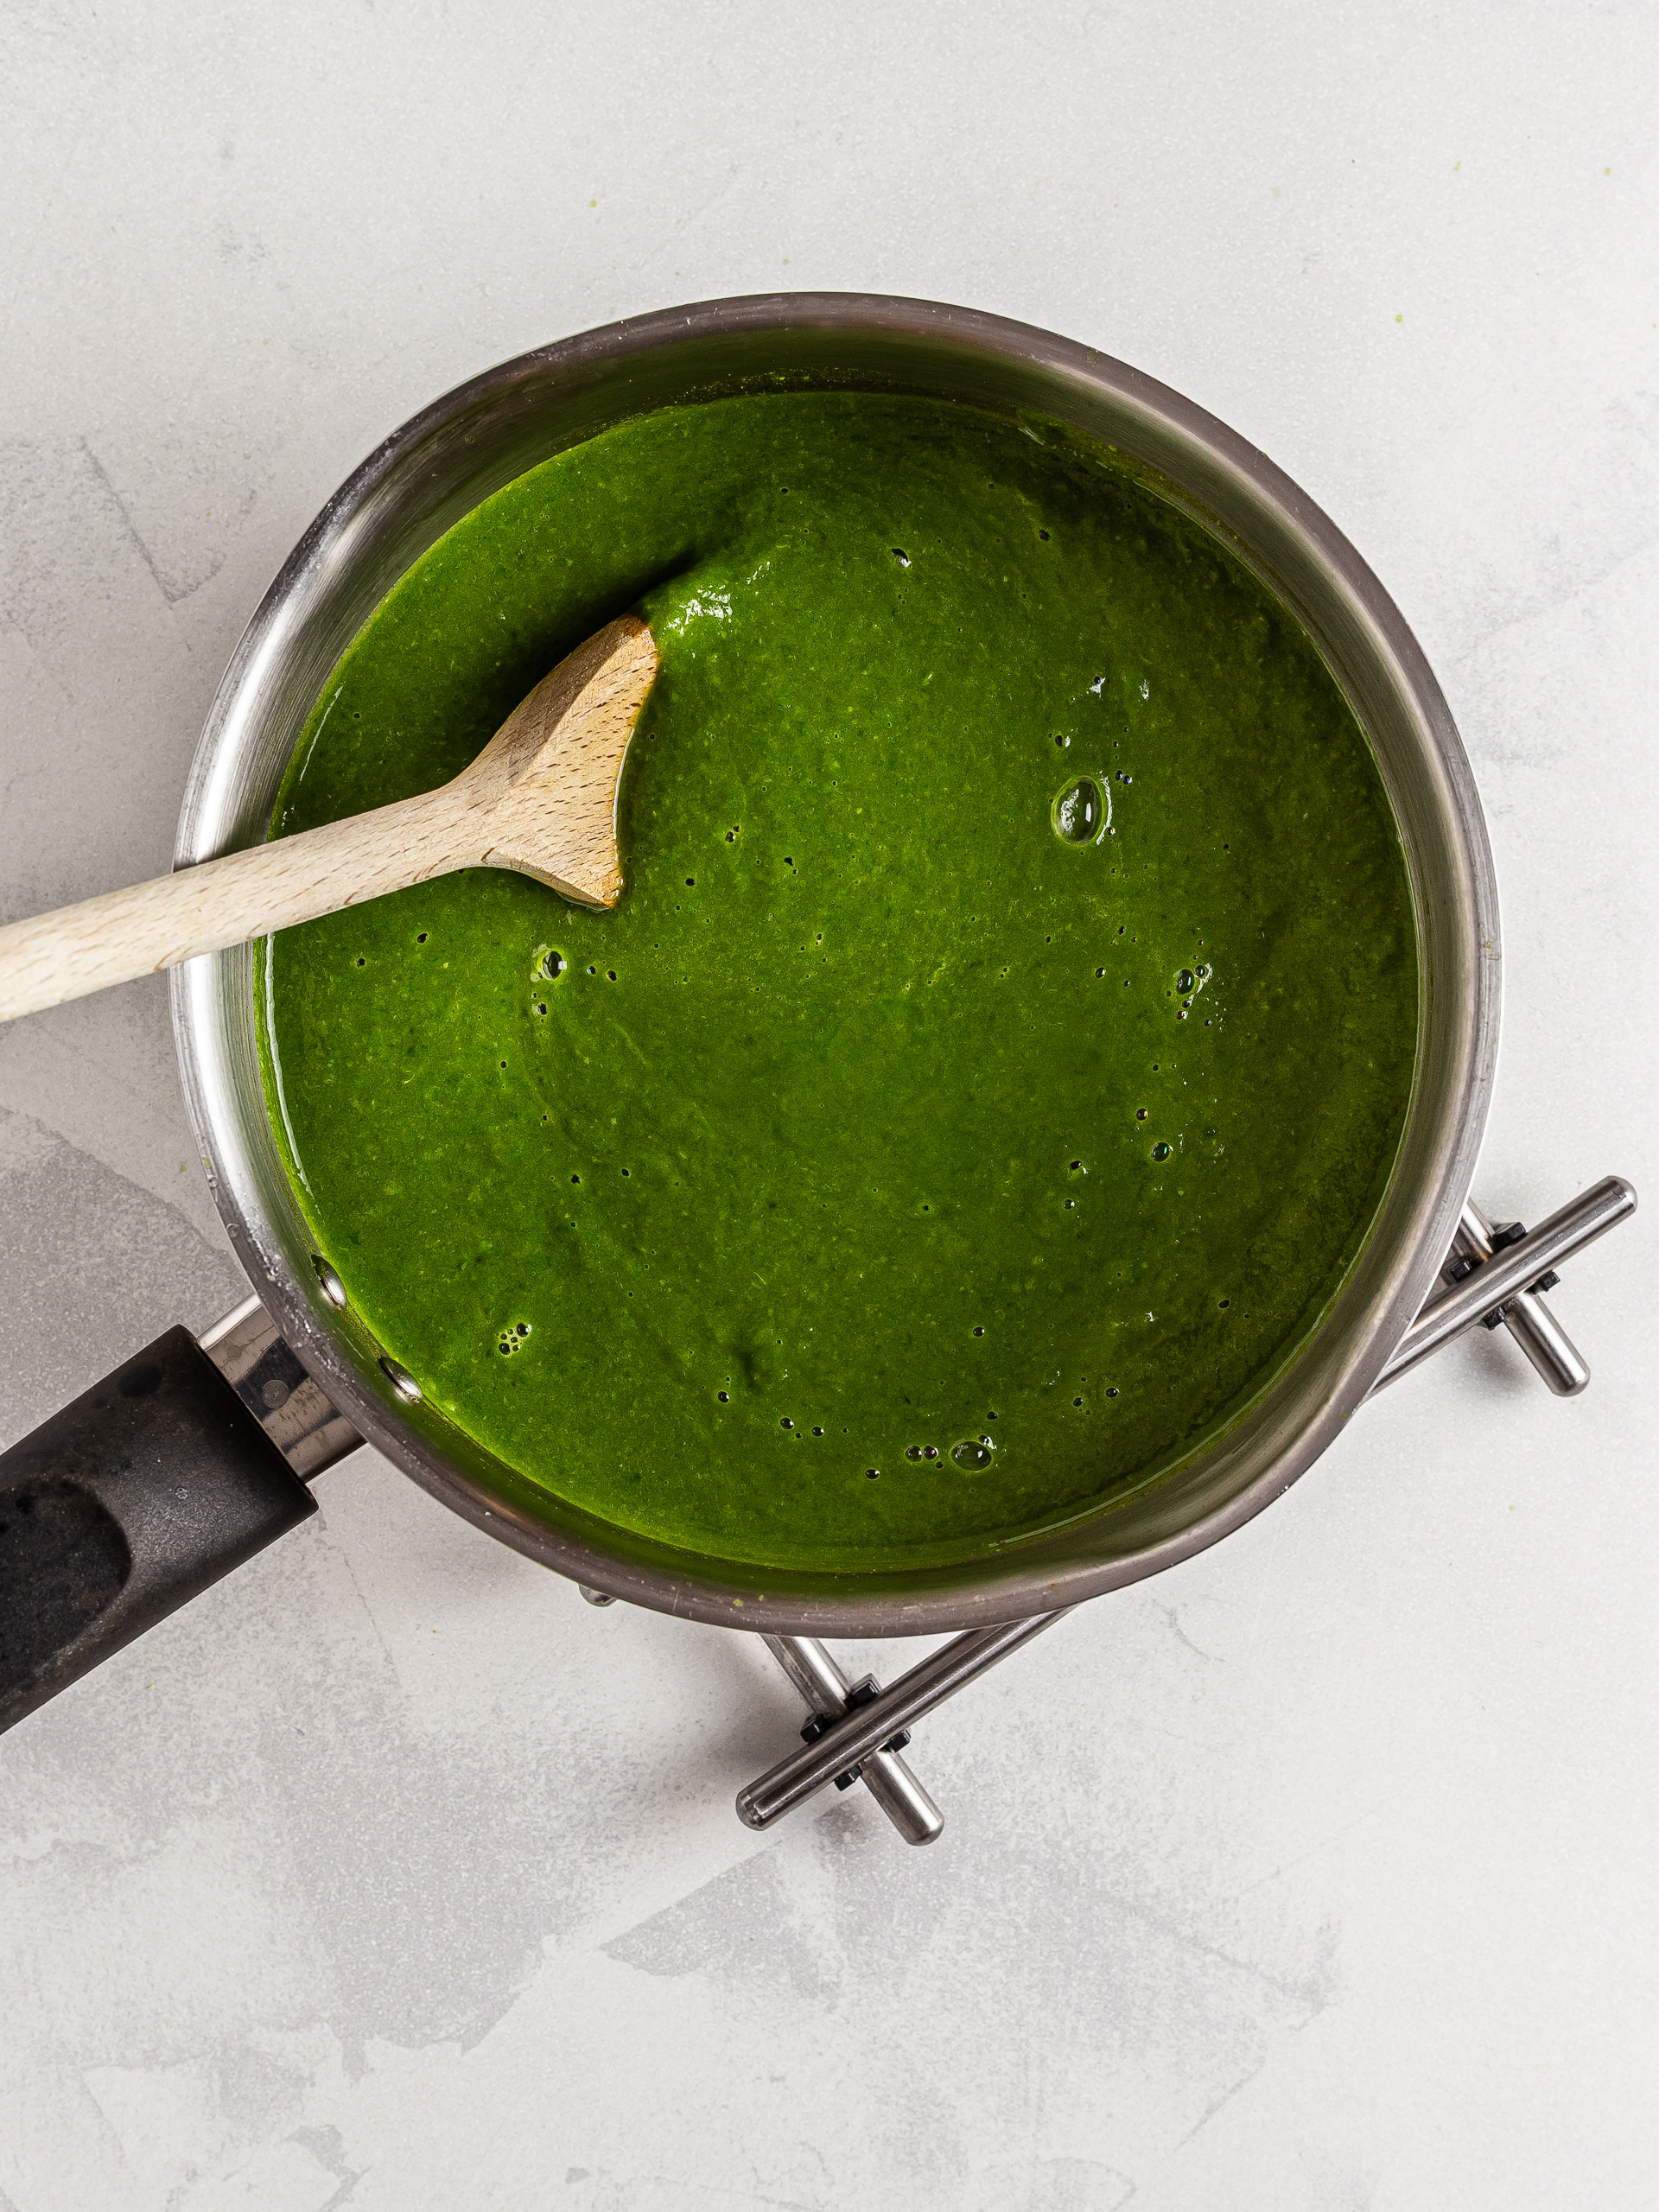 Blended spinach soup